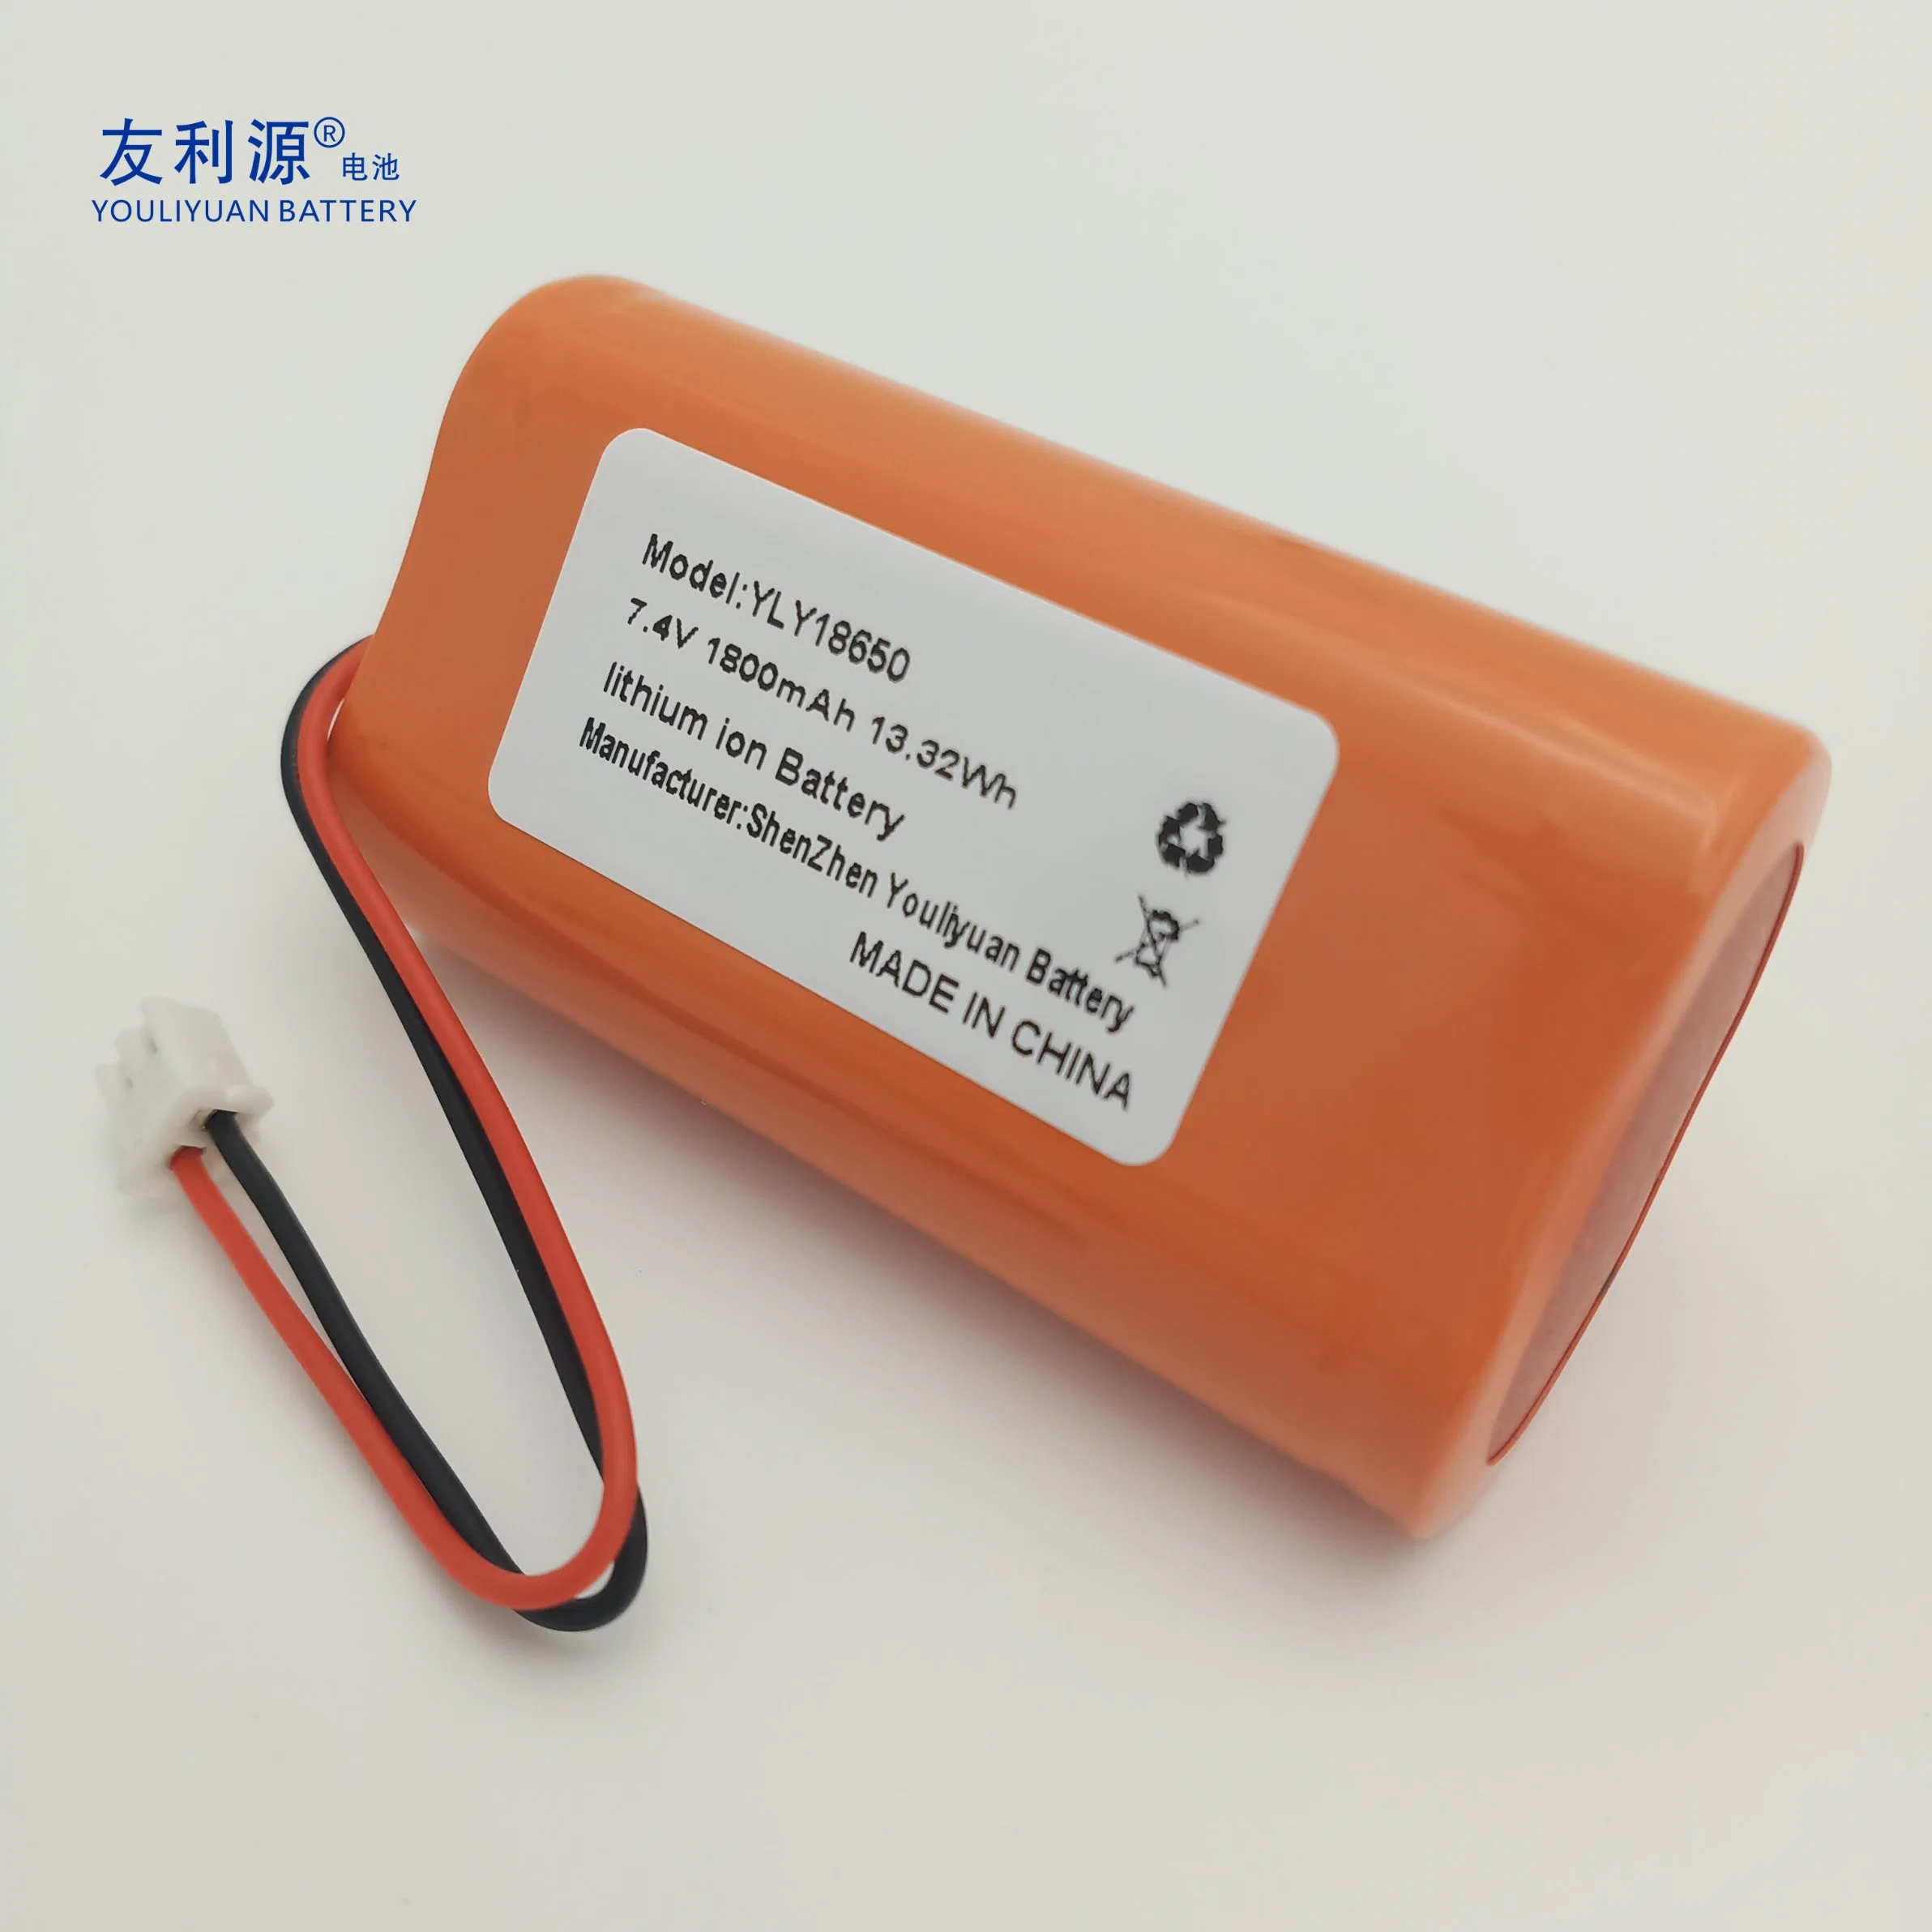 18650 Cell 2s1p 7.4V 1800mAh Rechargeable Lithium Battery for LED Light Head Lamp Walkie-Talkie